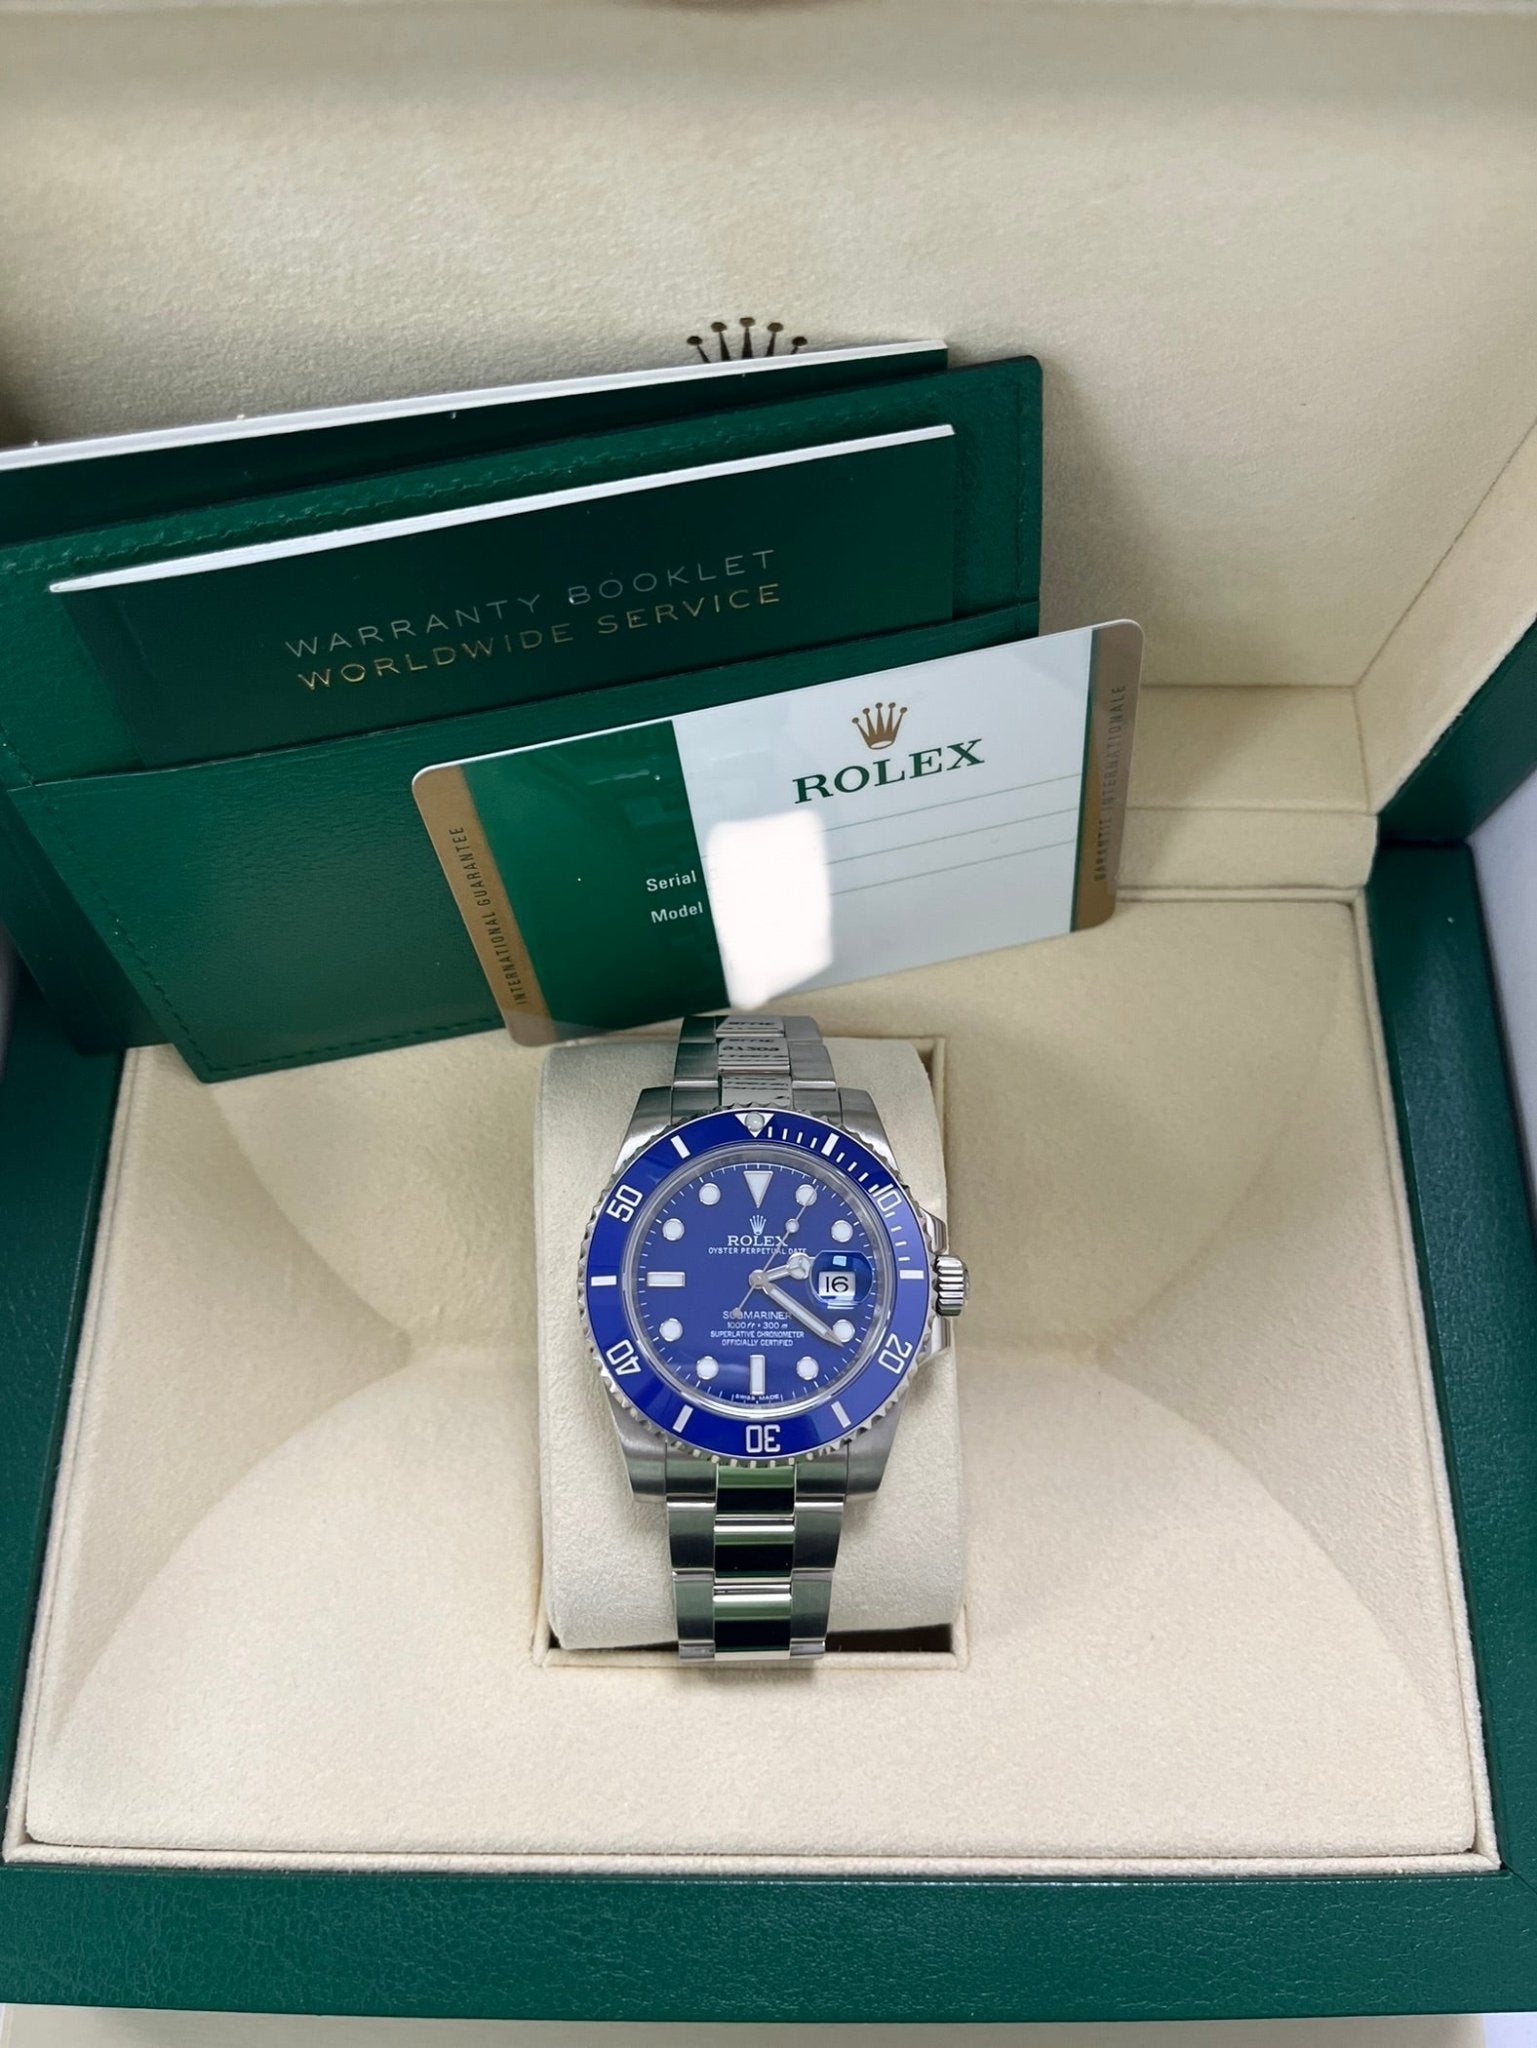 Rolex Submariner Date 40mm White Gold Blue Dial Smurf (Reference 116619LB) - WatchesOff5thWatch